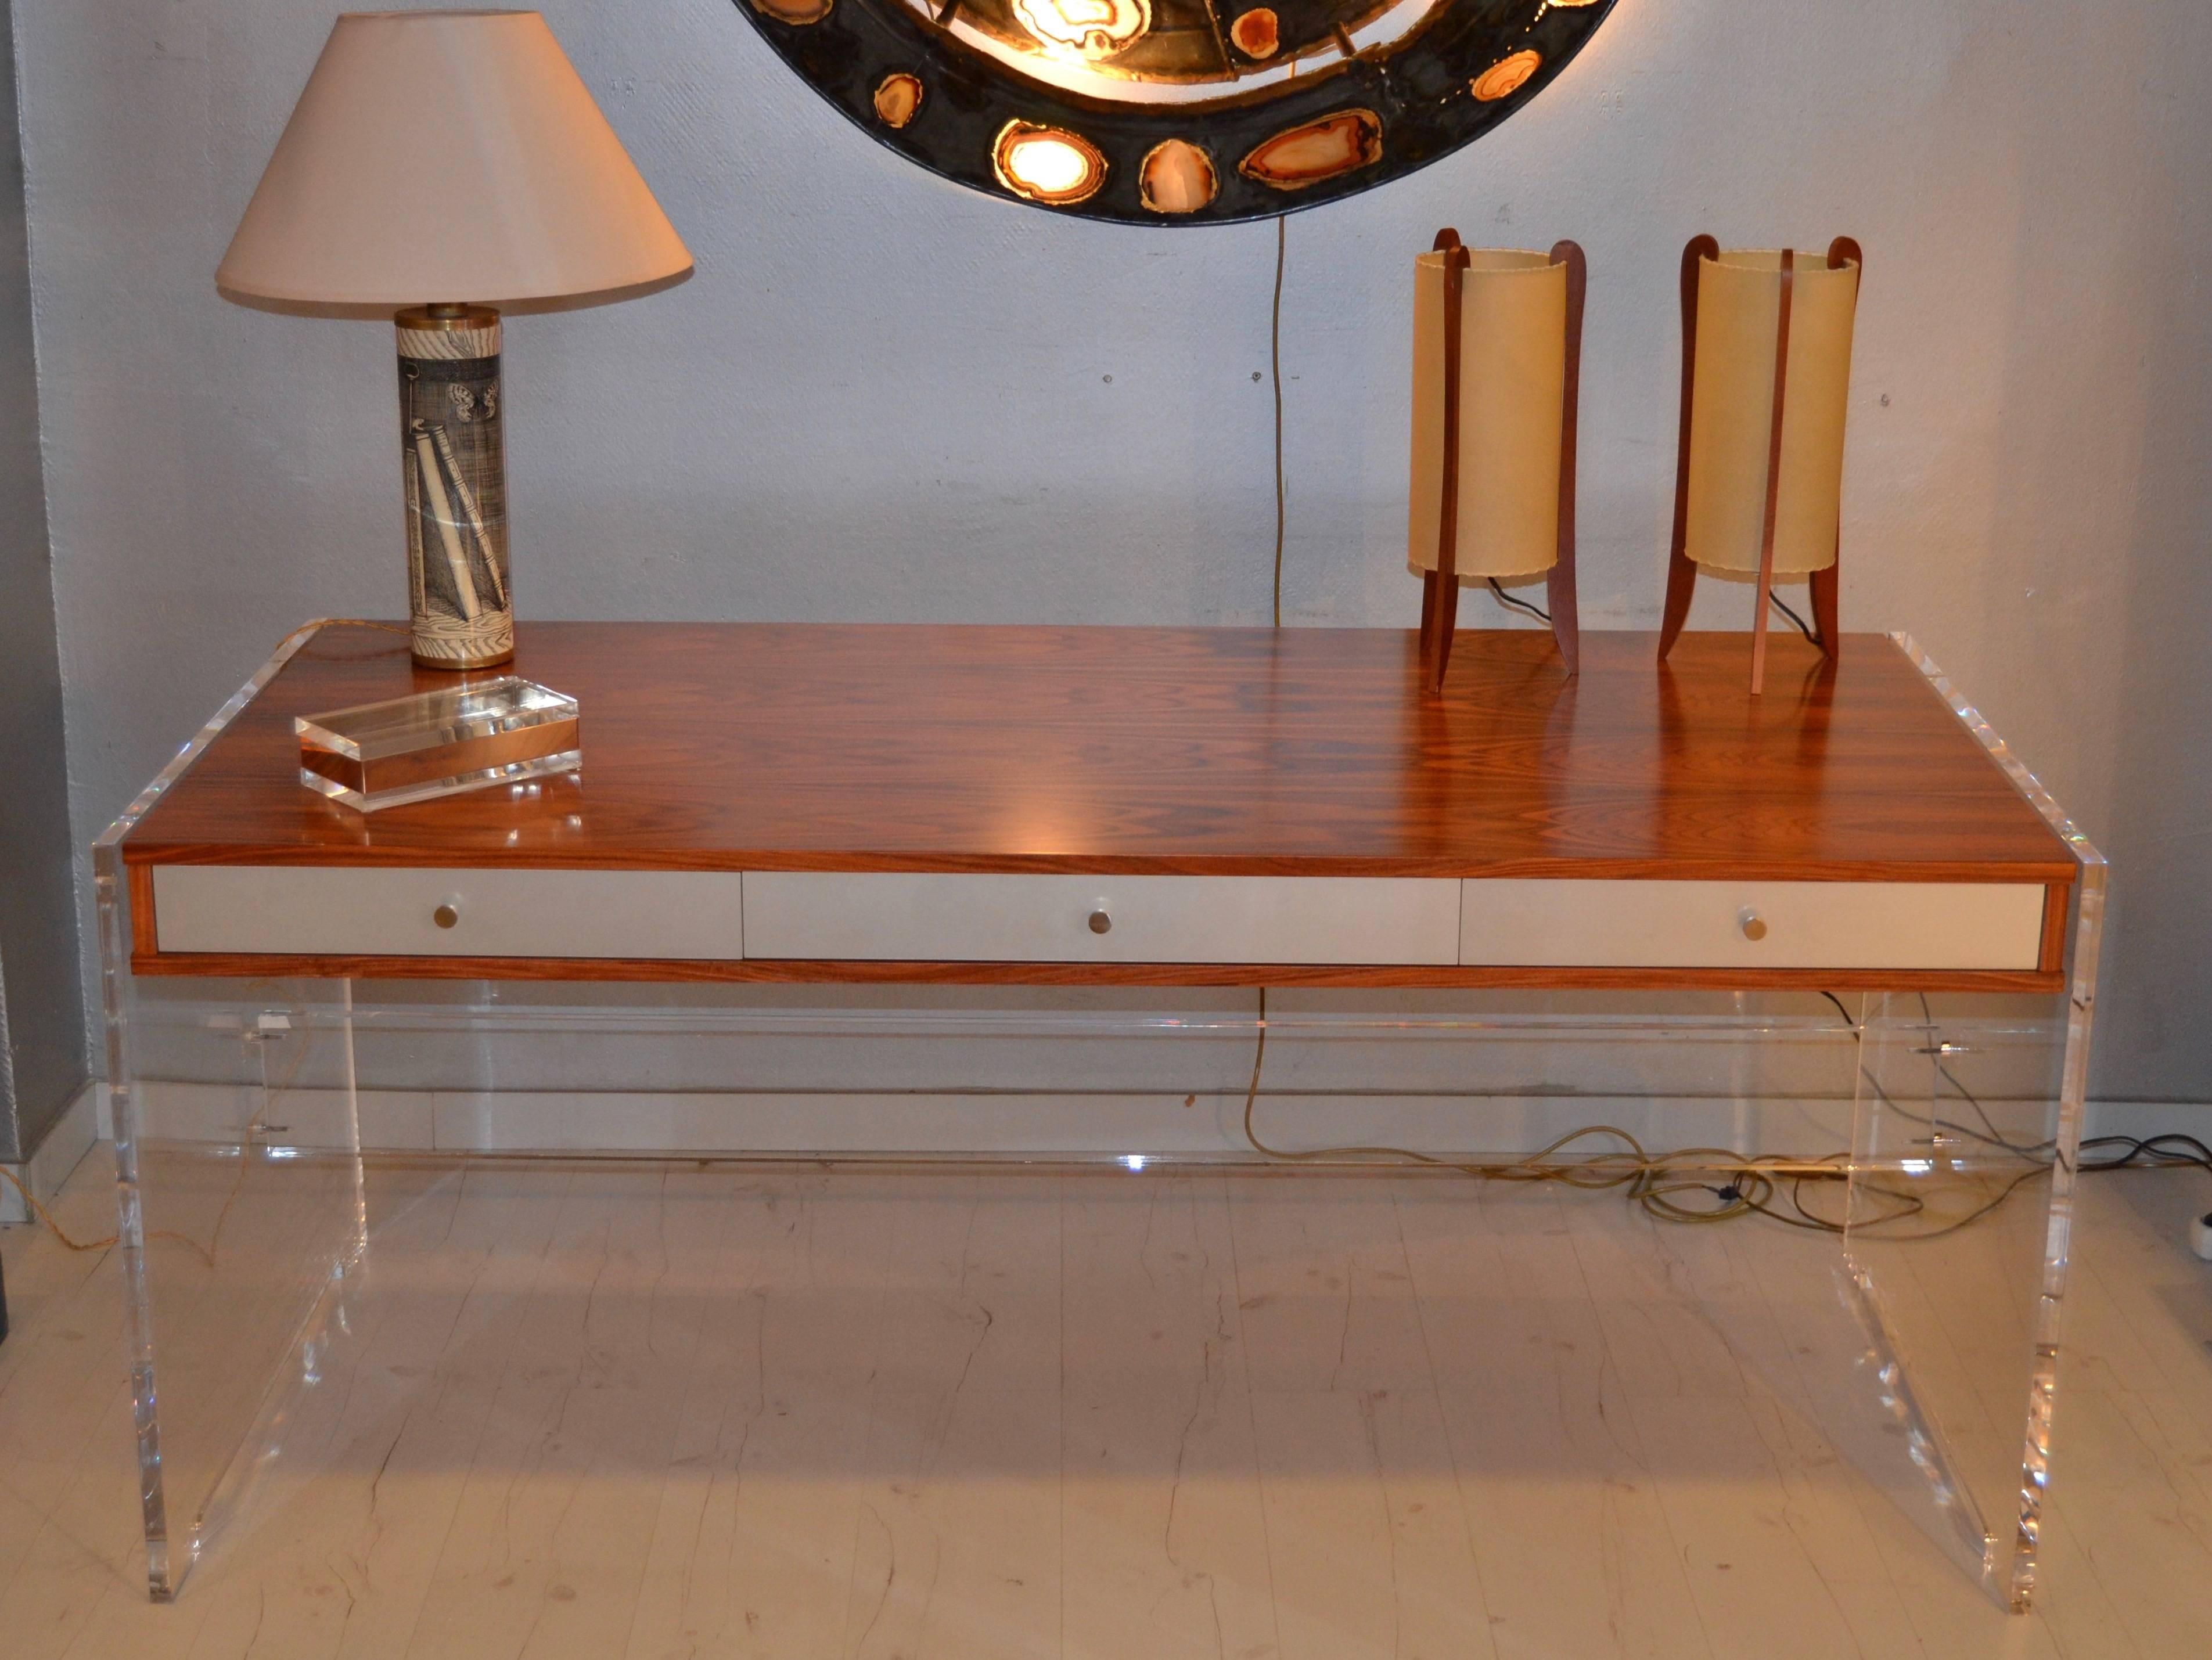 1970s mahogany and Lucite desk with chromed steel drawers.
Designed by Poul Norrekit (Danish).